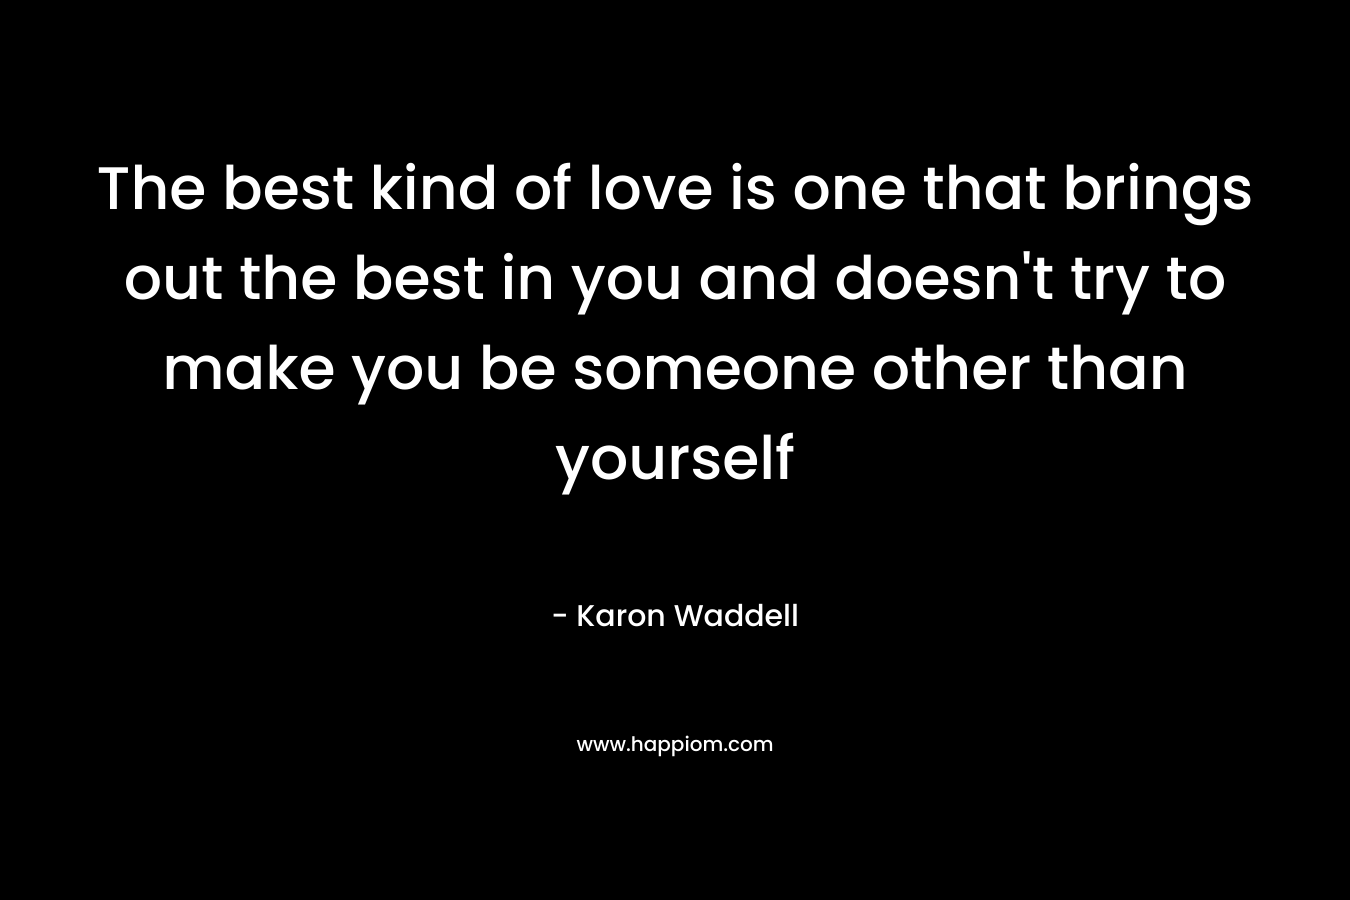 The best kind of love is one that brings out the best in you and doesn’t try to make you be someone other than yourself – Karon Waddell